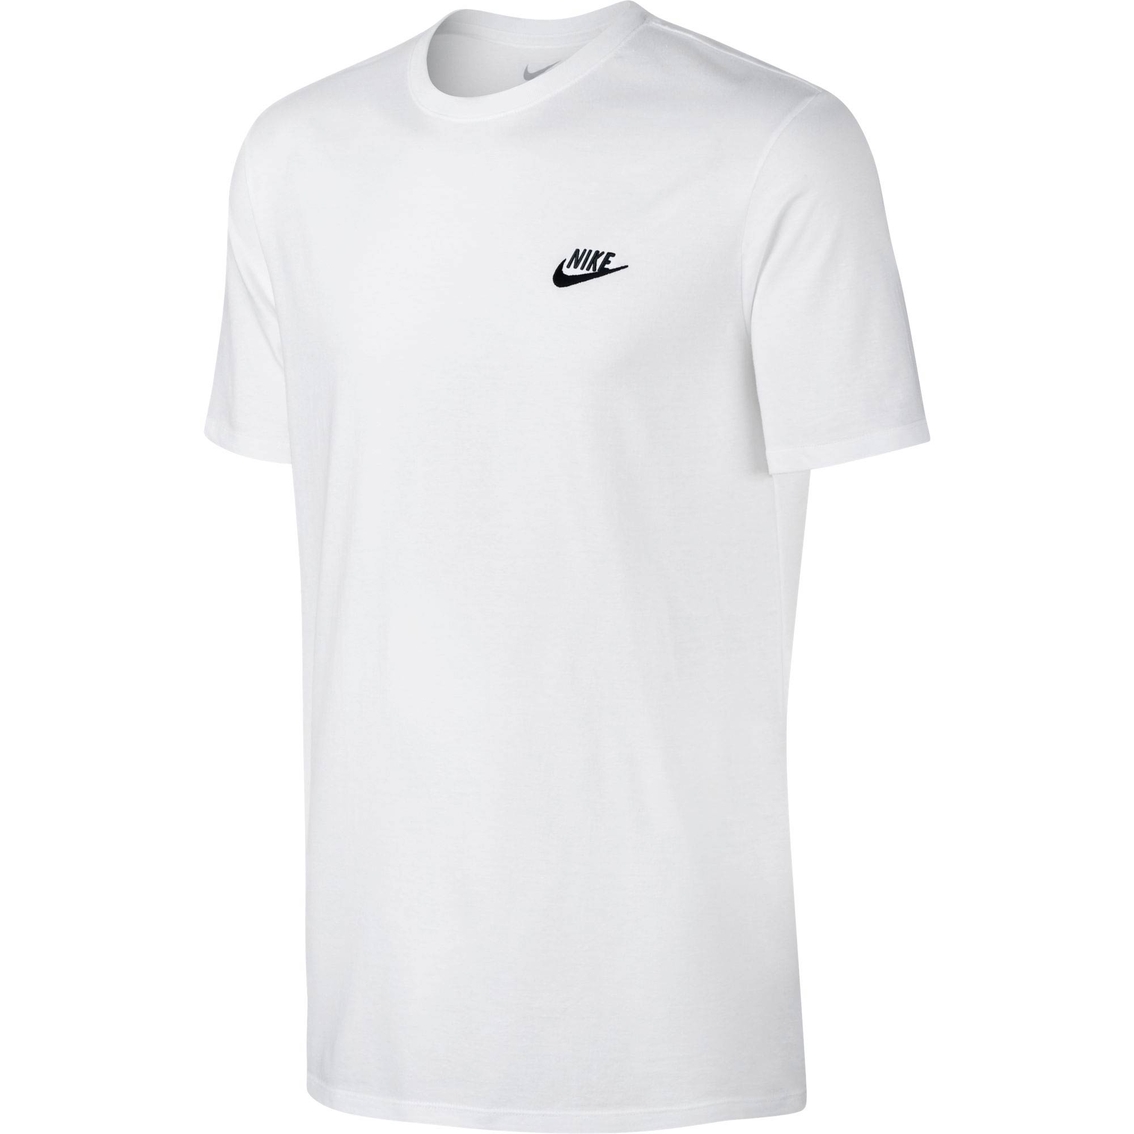 Nike Nsw Embroidered Swoosh Tee | Hoodies & Jackets | Clothing ...